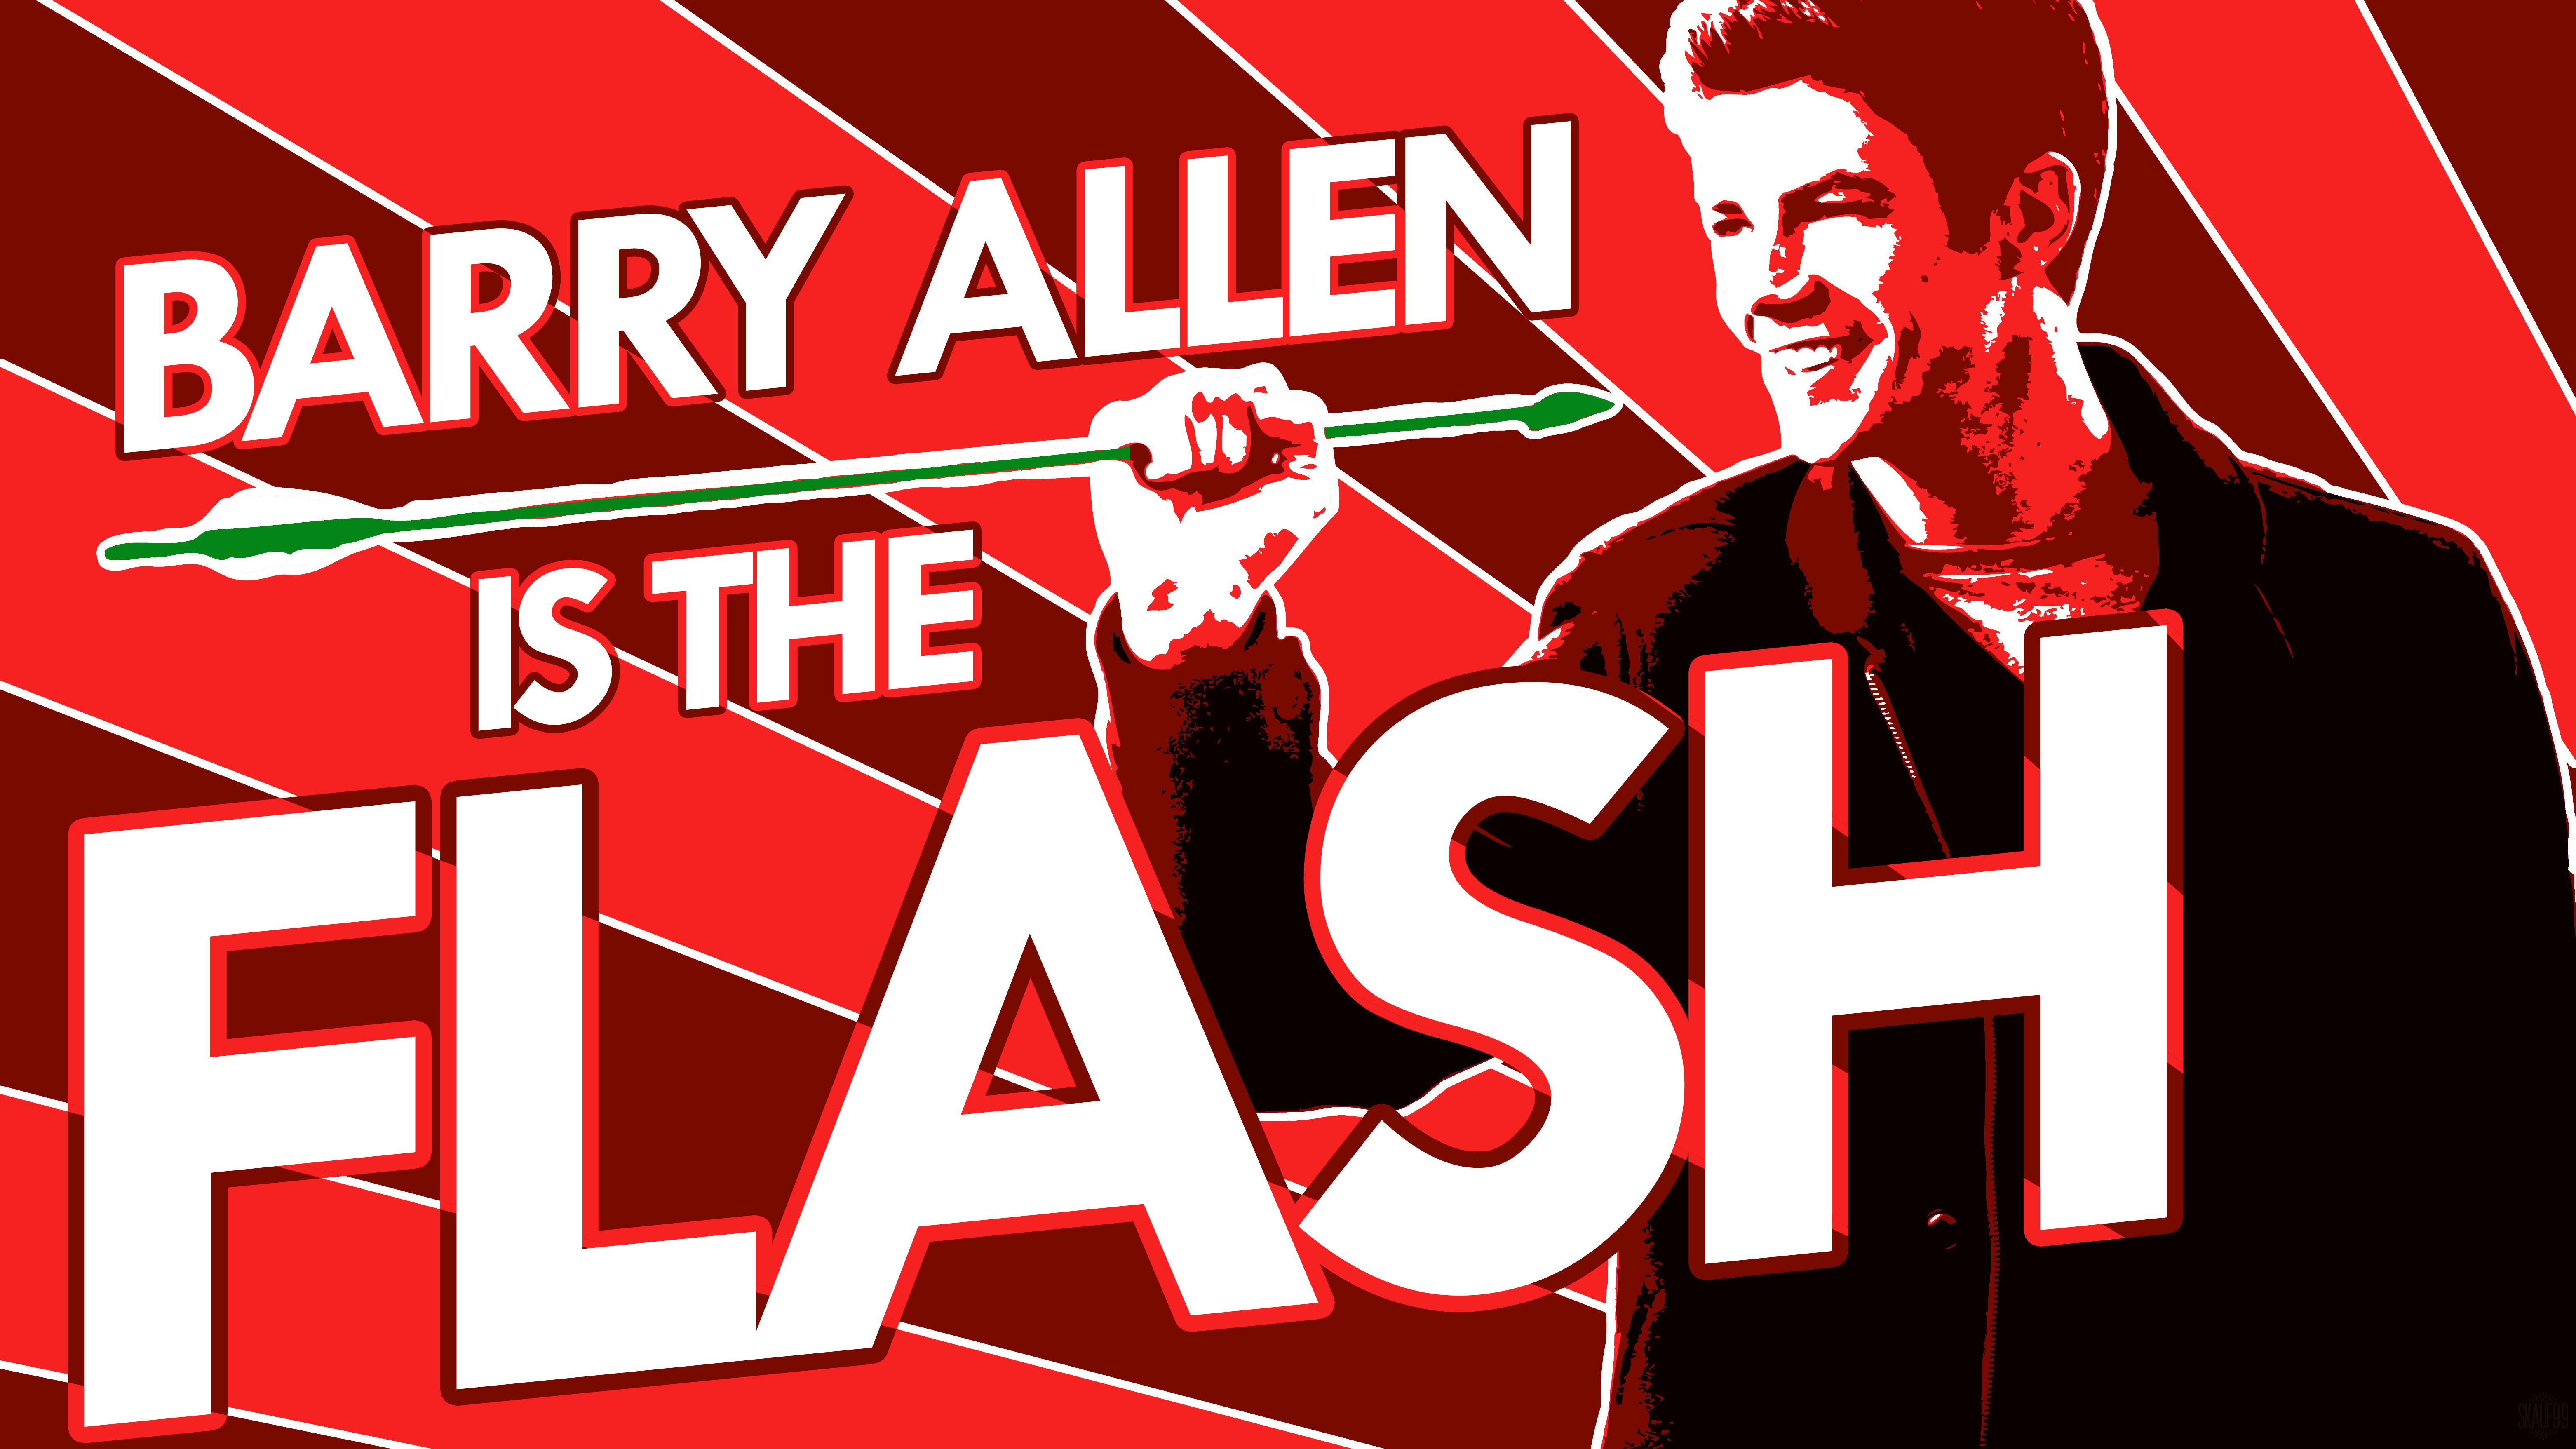 tv show, the flash (2014), barry allen, flash, grant gustin, red